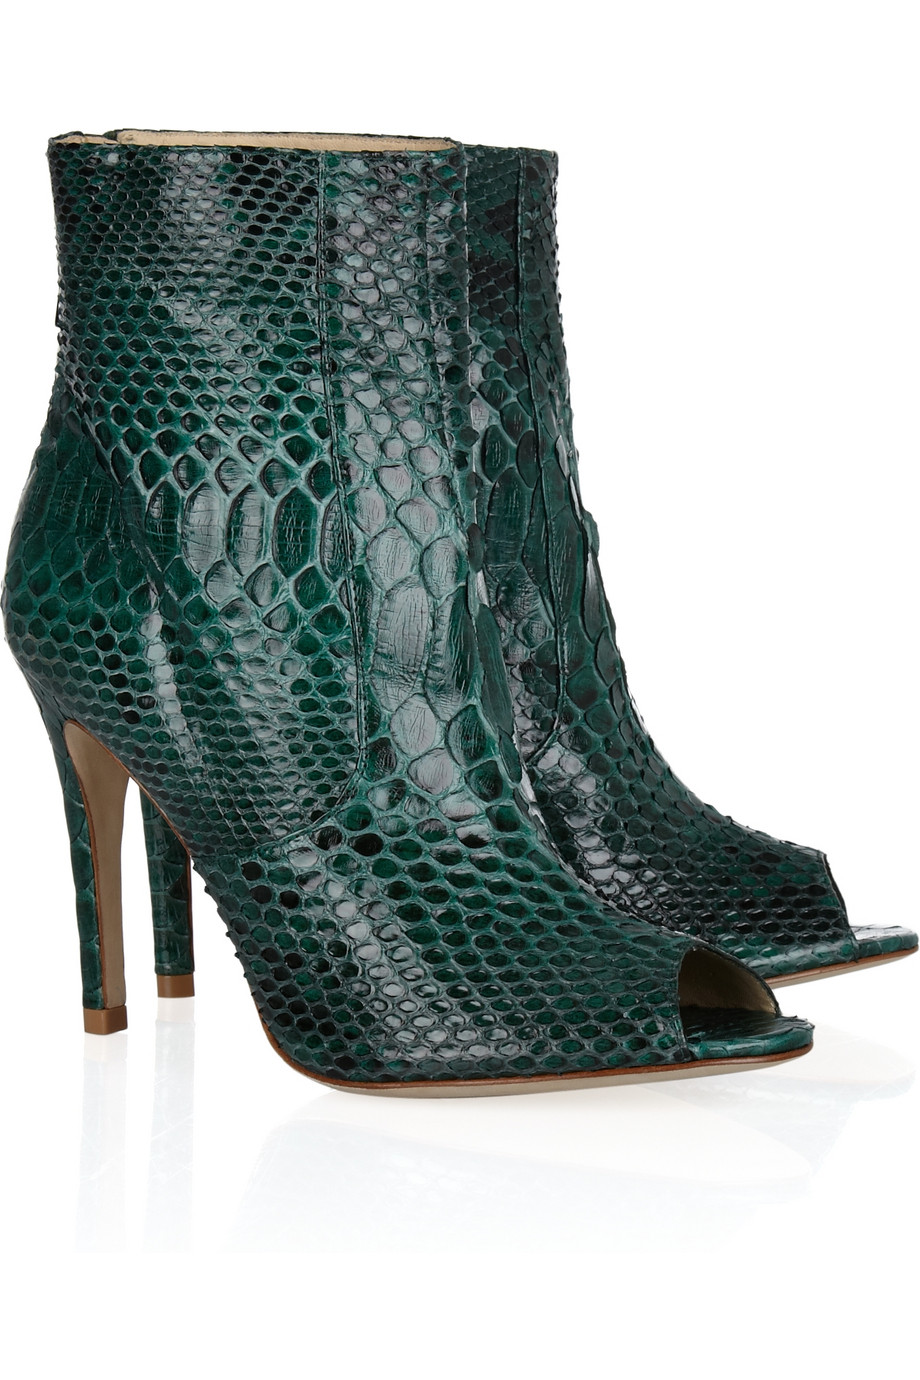 Lyst - Alexandre birman Python Ankle Boots in Green